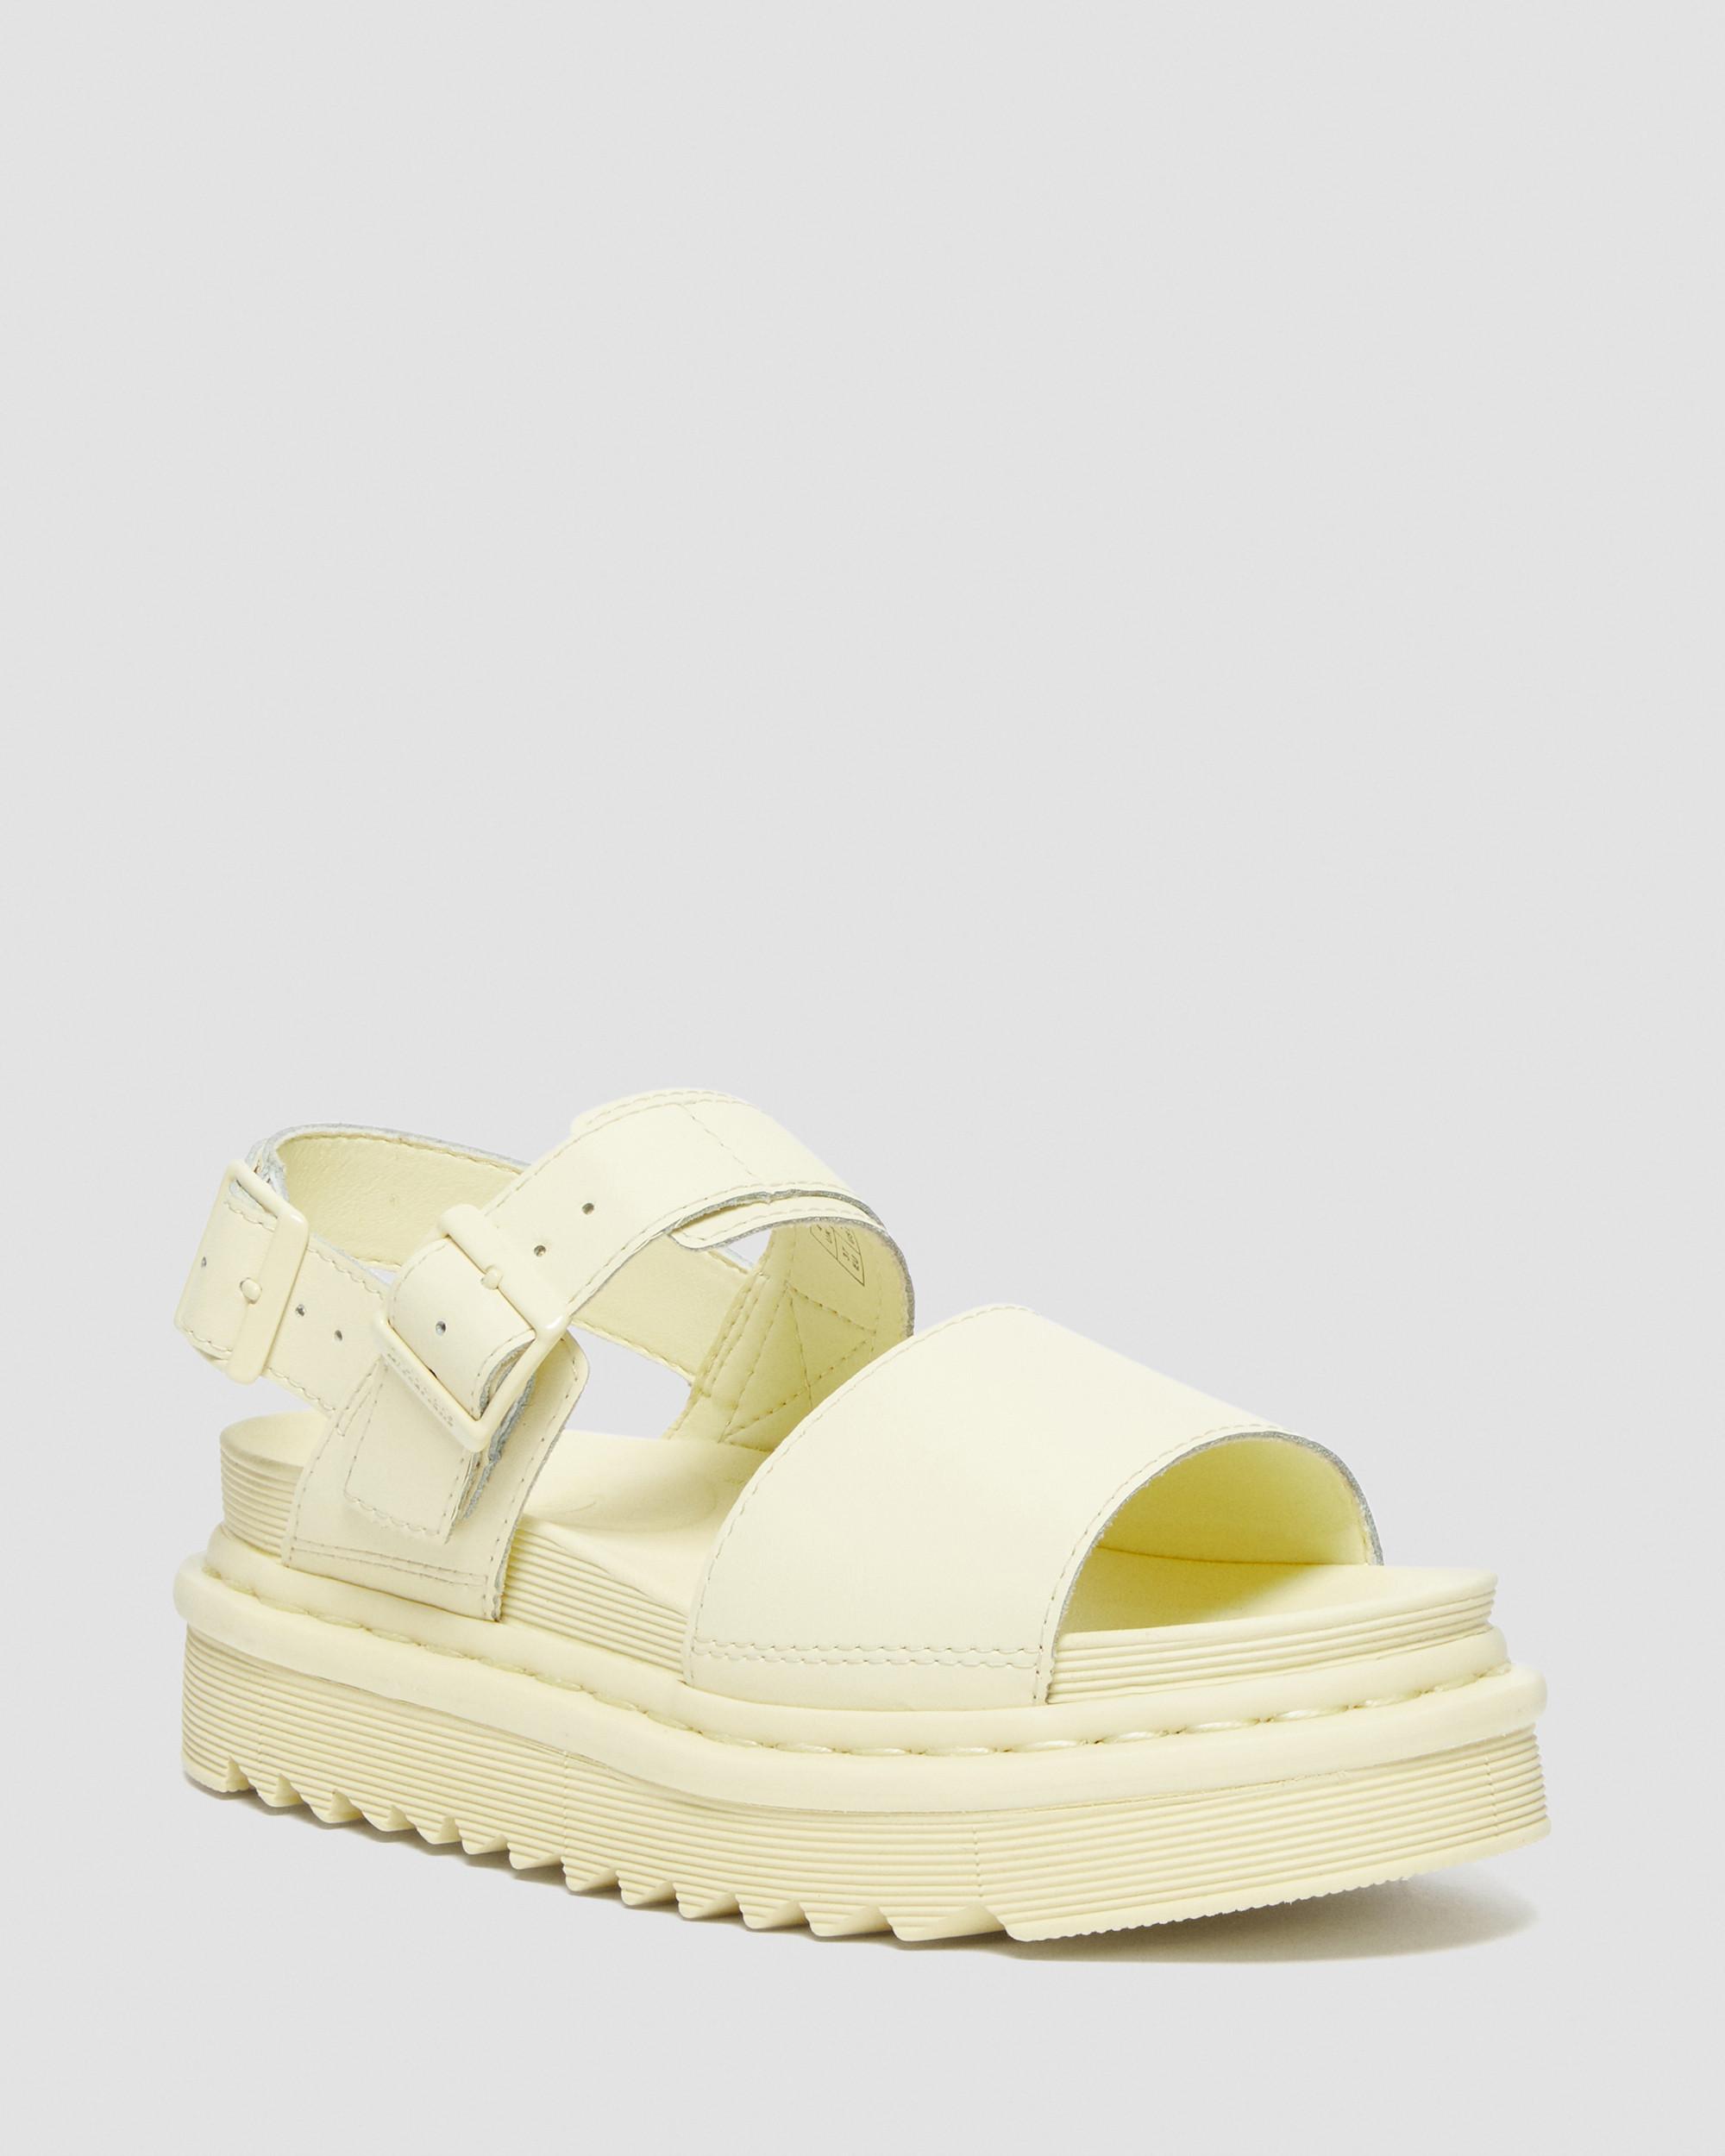 Voss Hydro Leather Strap Sandals, Cream | Dr. Martens